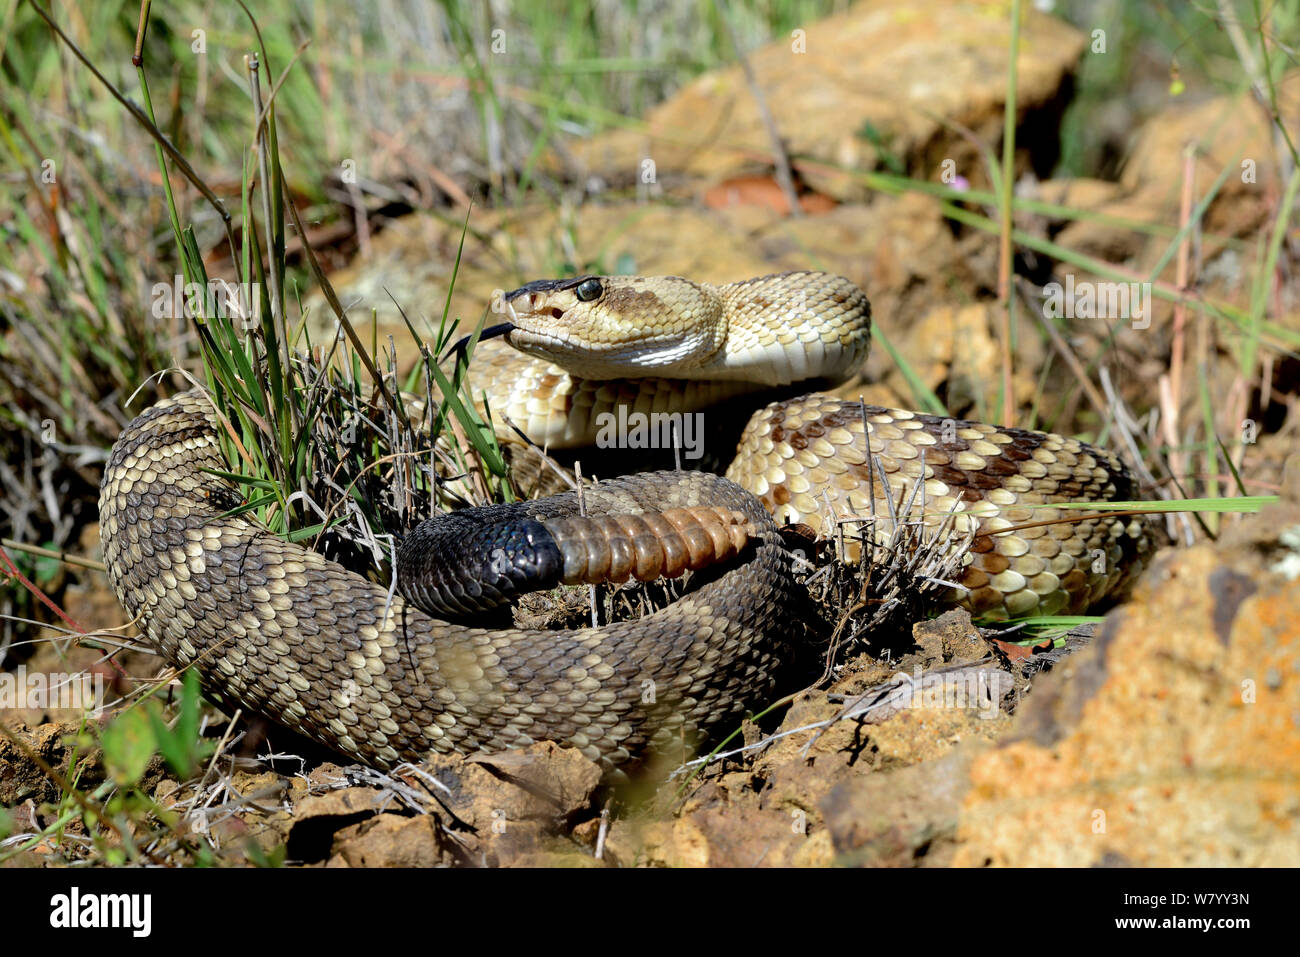 Black-tailed rattlesnake (Crotalus molossus) tasting the air, Arizona, USA, September. Controlled conditions. Stock Photo